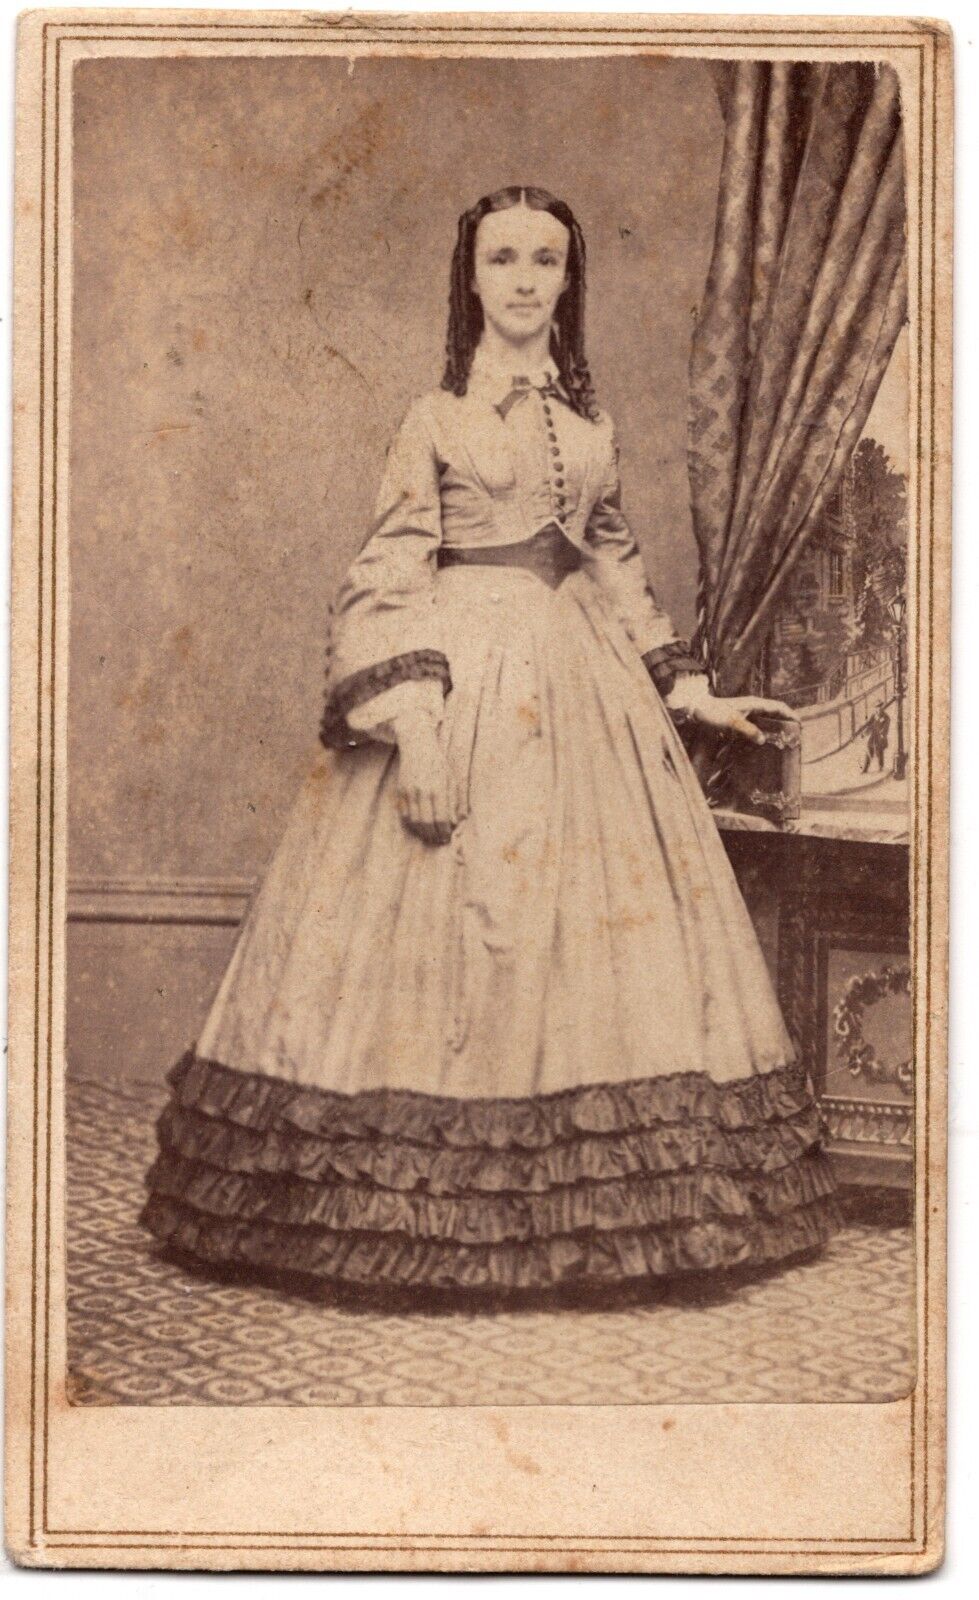 ANTIQUE CDV CIRCA 1860s GORGEOUS YOUNG LADY IN DRESS S.B. BROWN PROVIDENCE R.I.